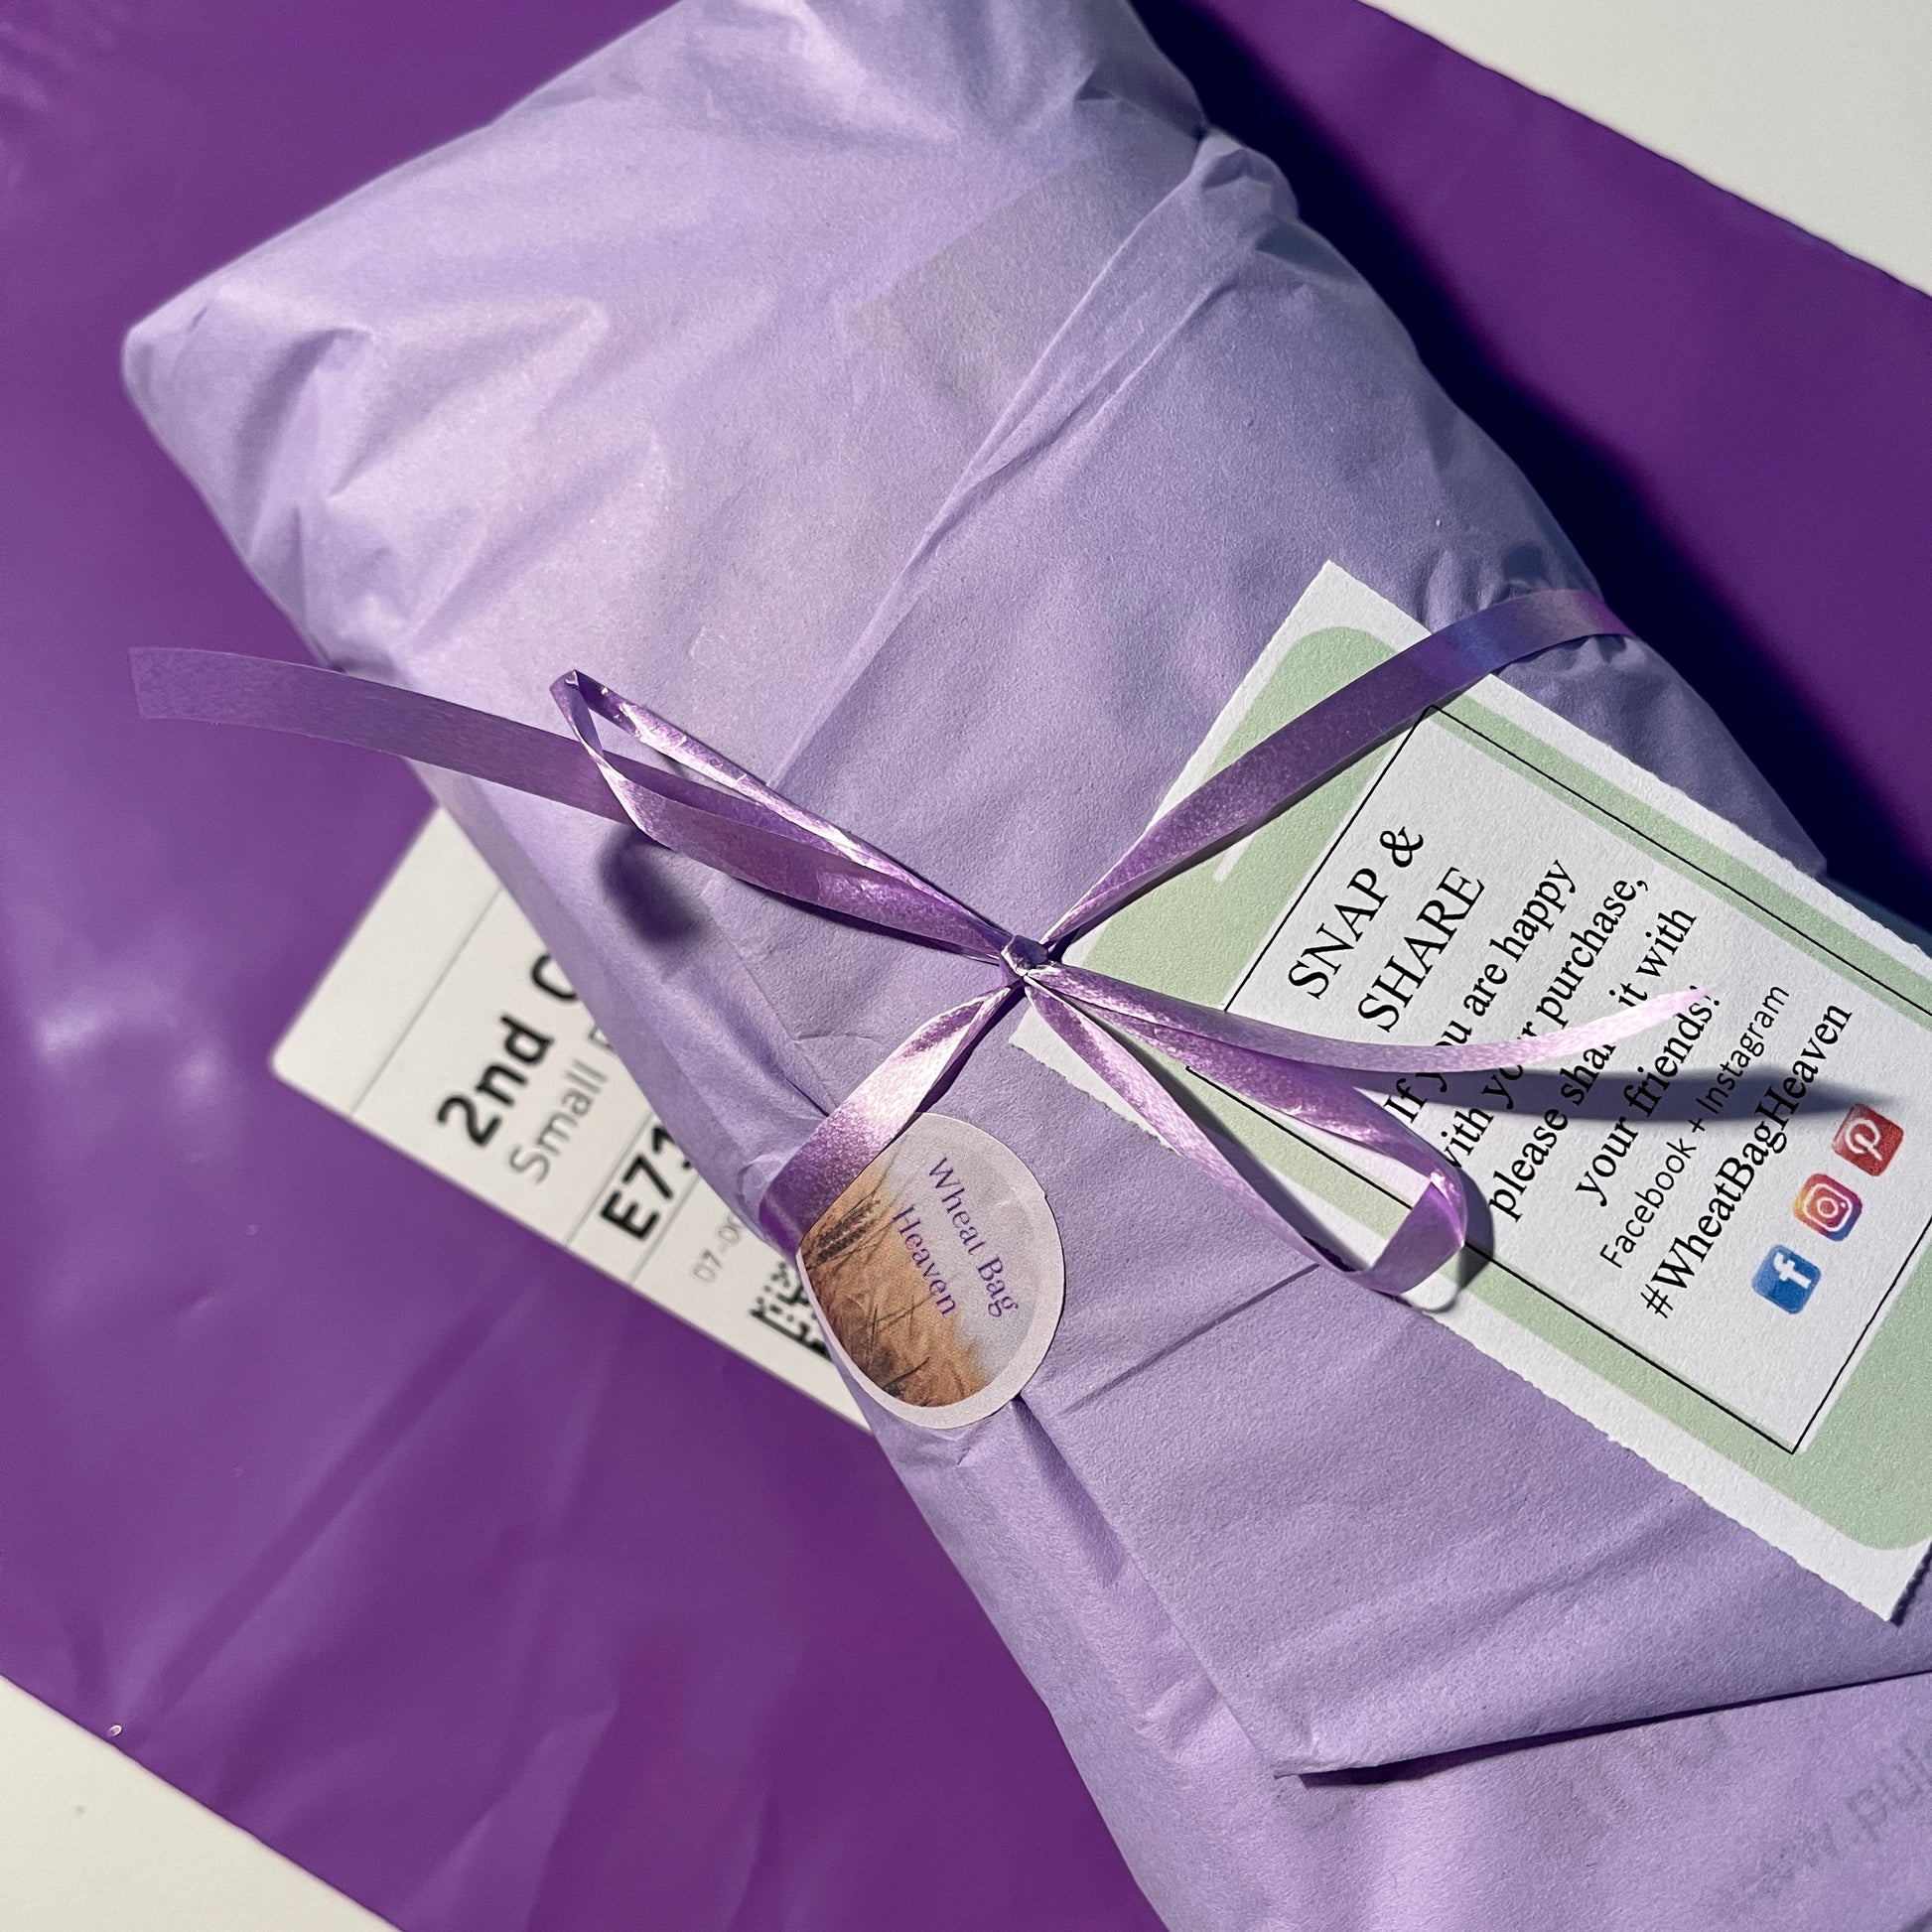 our wheat bag packaging, each wheat bag is wrapped in lilac tissue paper and tied with ribbon and secured with a WheatBagHeaven label and sent in a purple envelope bag with 2nd class free shipping 